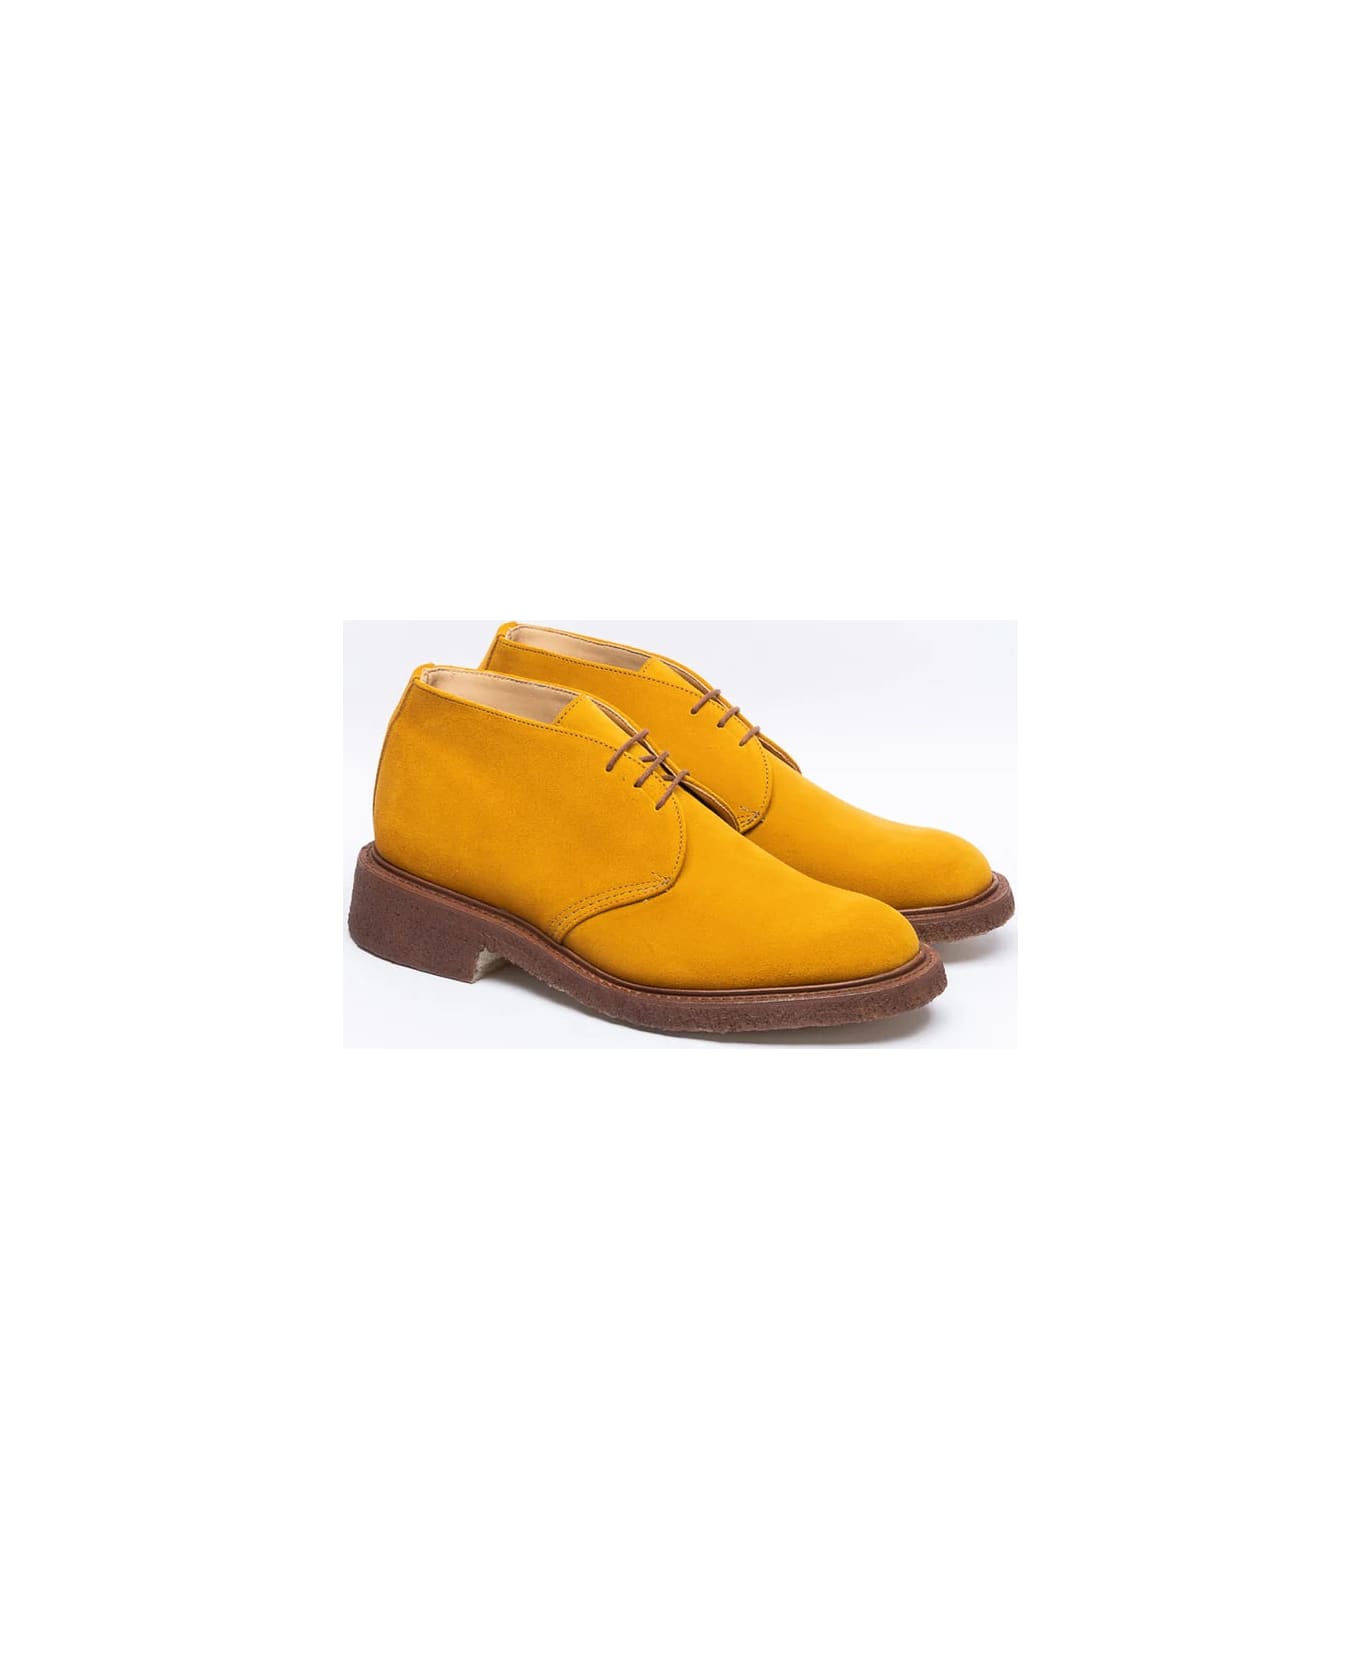 Tricker's Winston Suede Ankle Boot Curry Suede Crepe Sole - CURRY